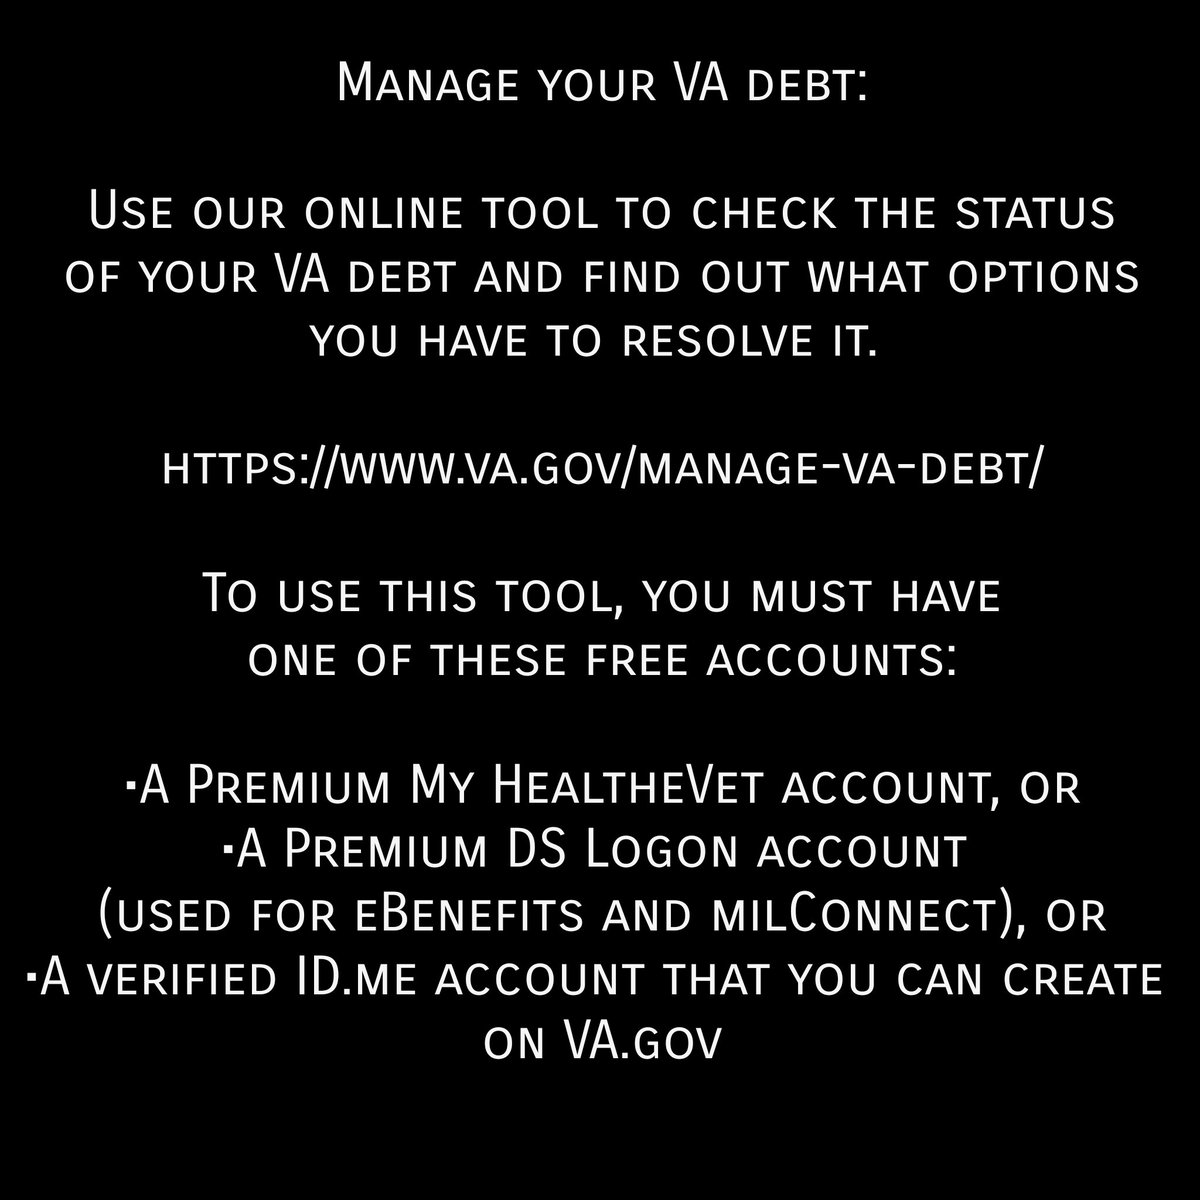 14/ Manage your VA debt:Use our online tool to check the status of your VA debt and find out what options you have to resolve it.  https://www.va.gov/manage-va-debt/ 